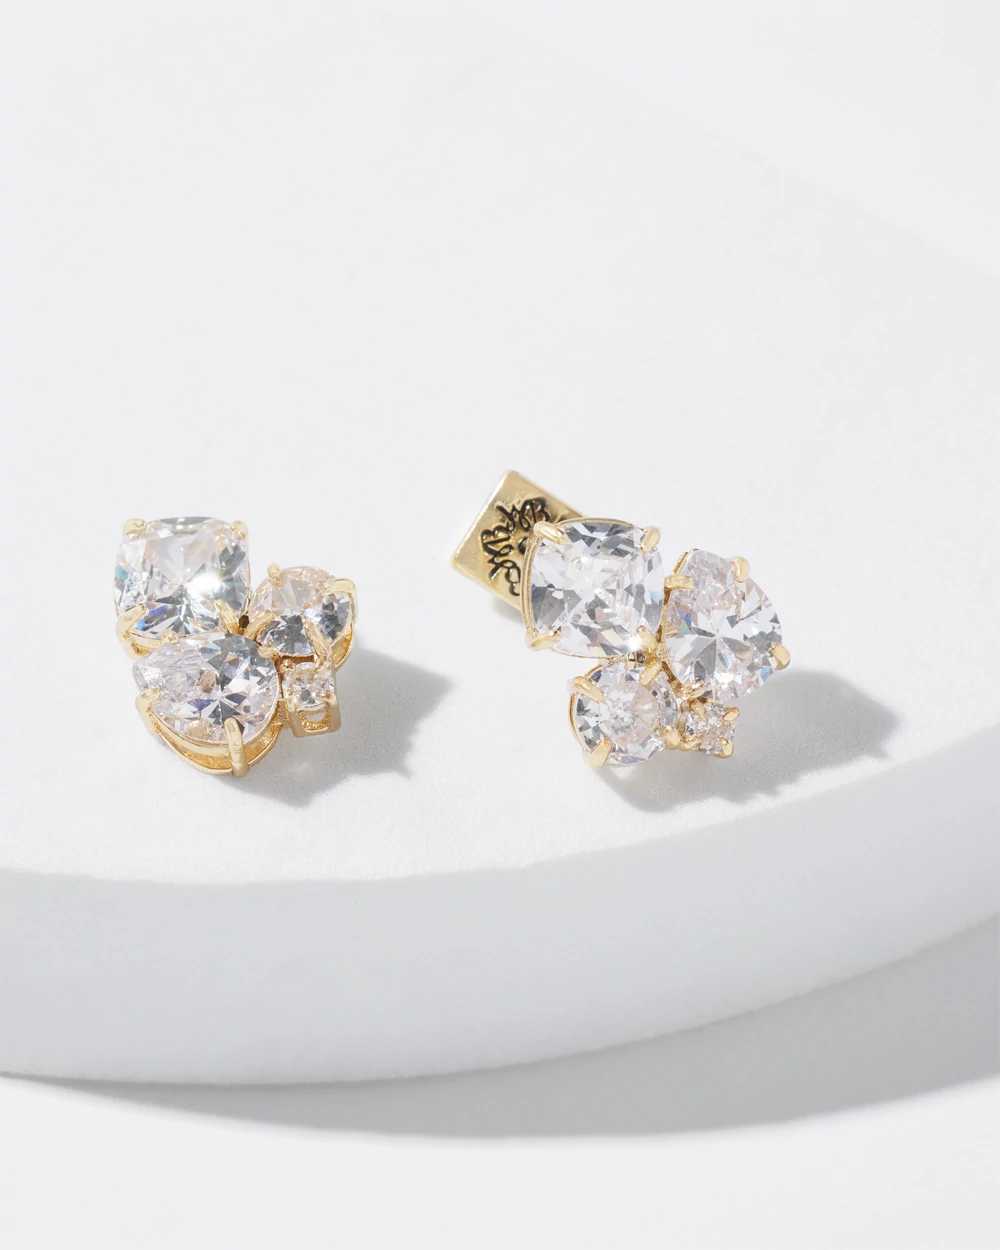 Gold And Crystal Cluster Stud Earrings click to view larger image.